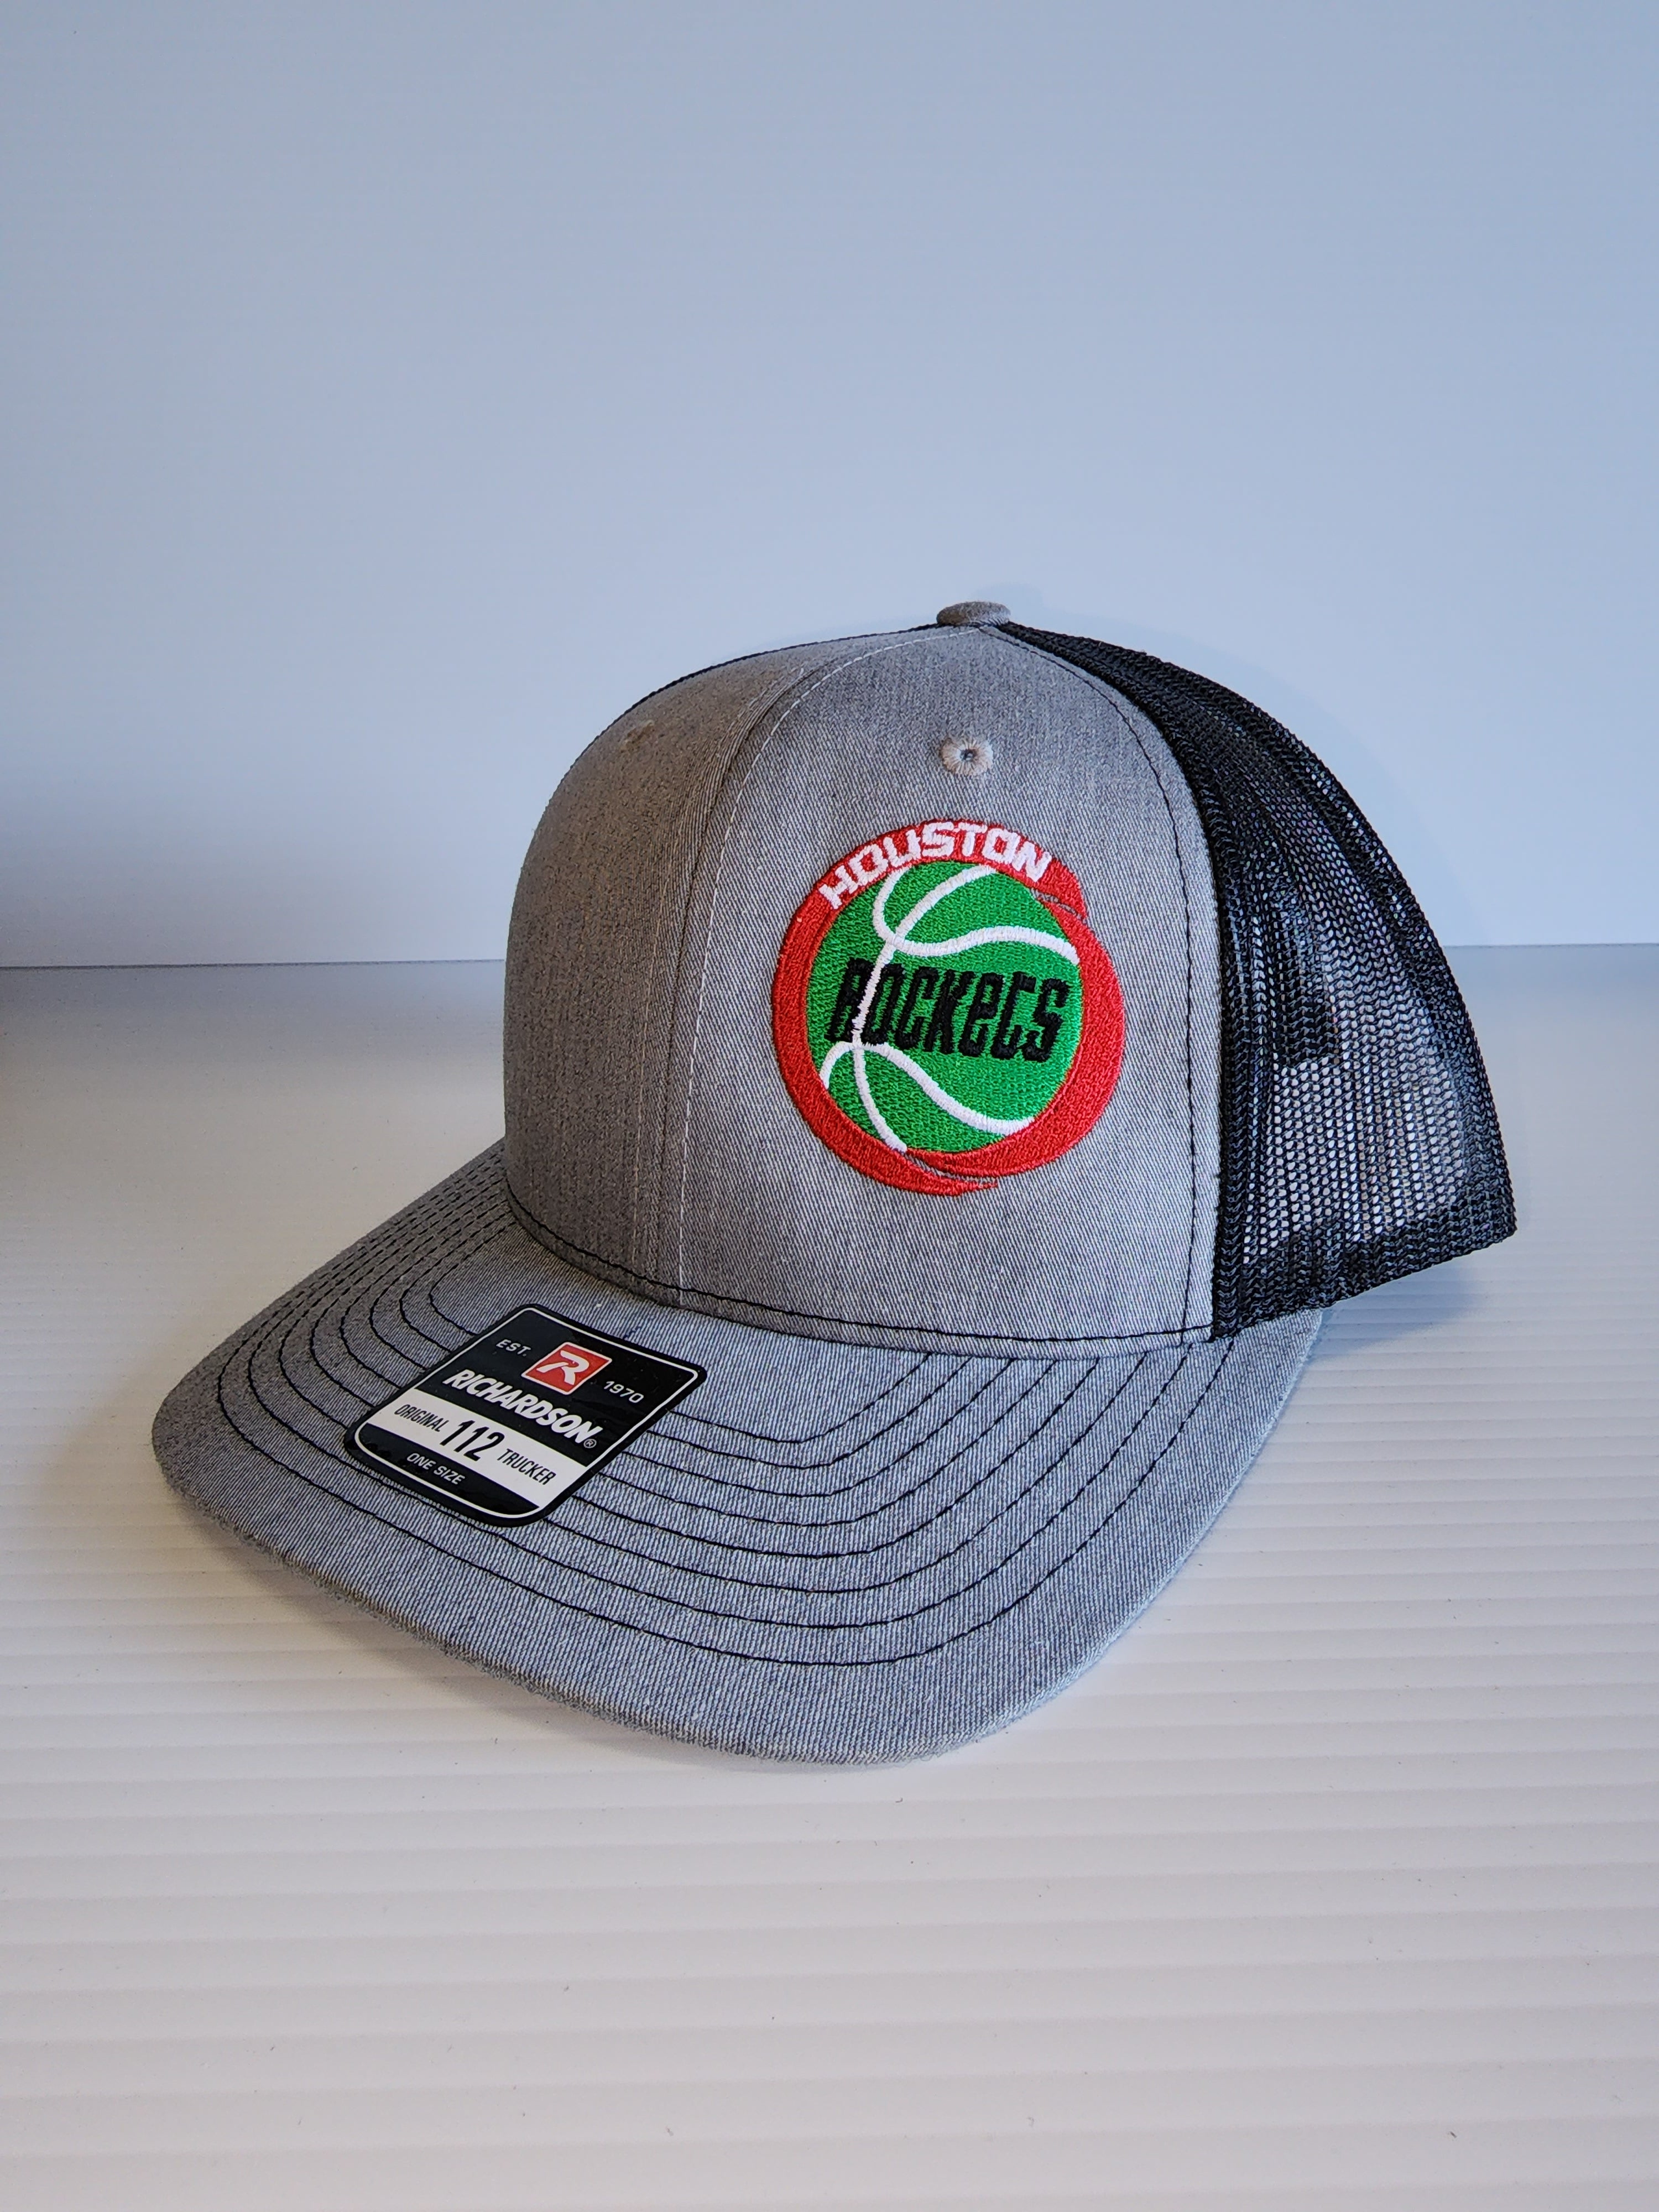 Houston Rockets Mexico Themed Grey/Black Trucker Cap with Mexican Flag on the back